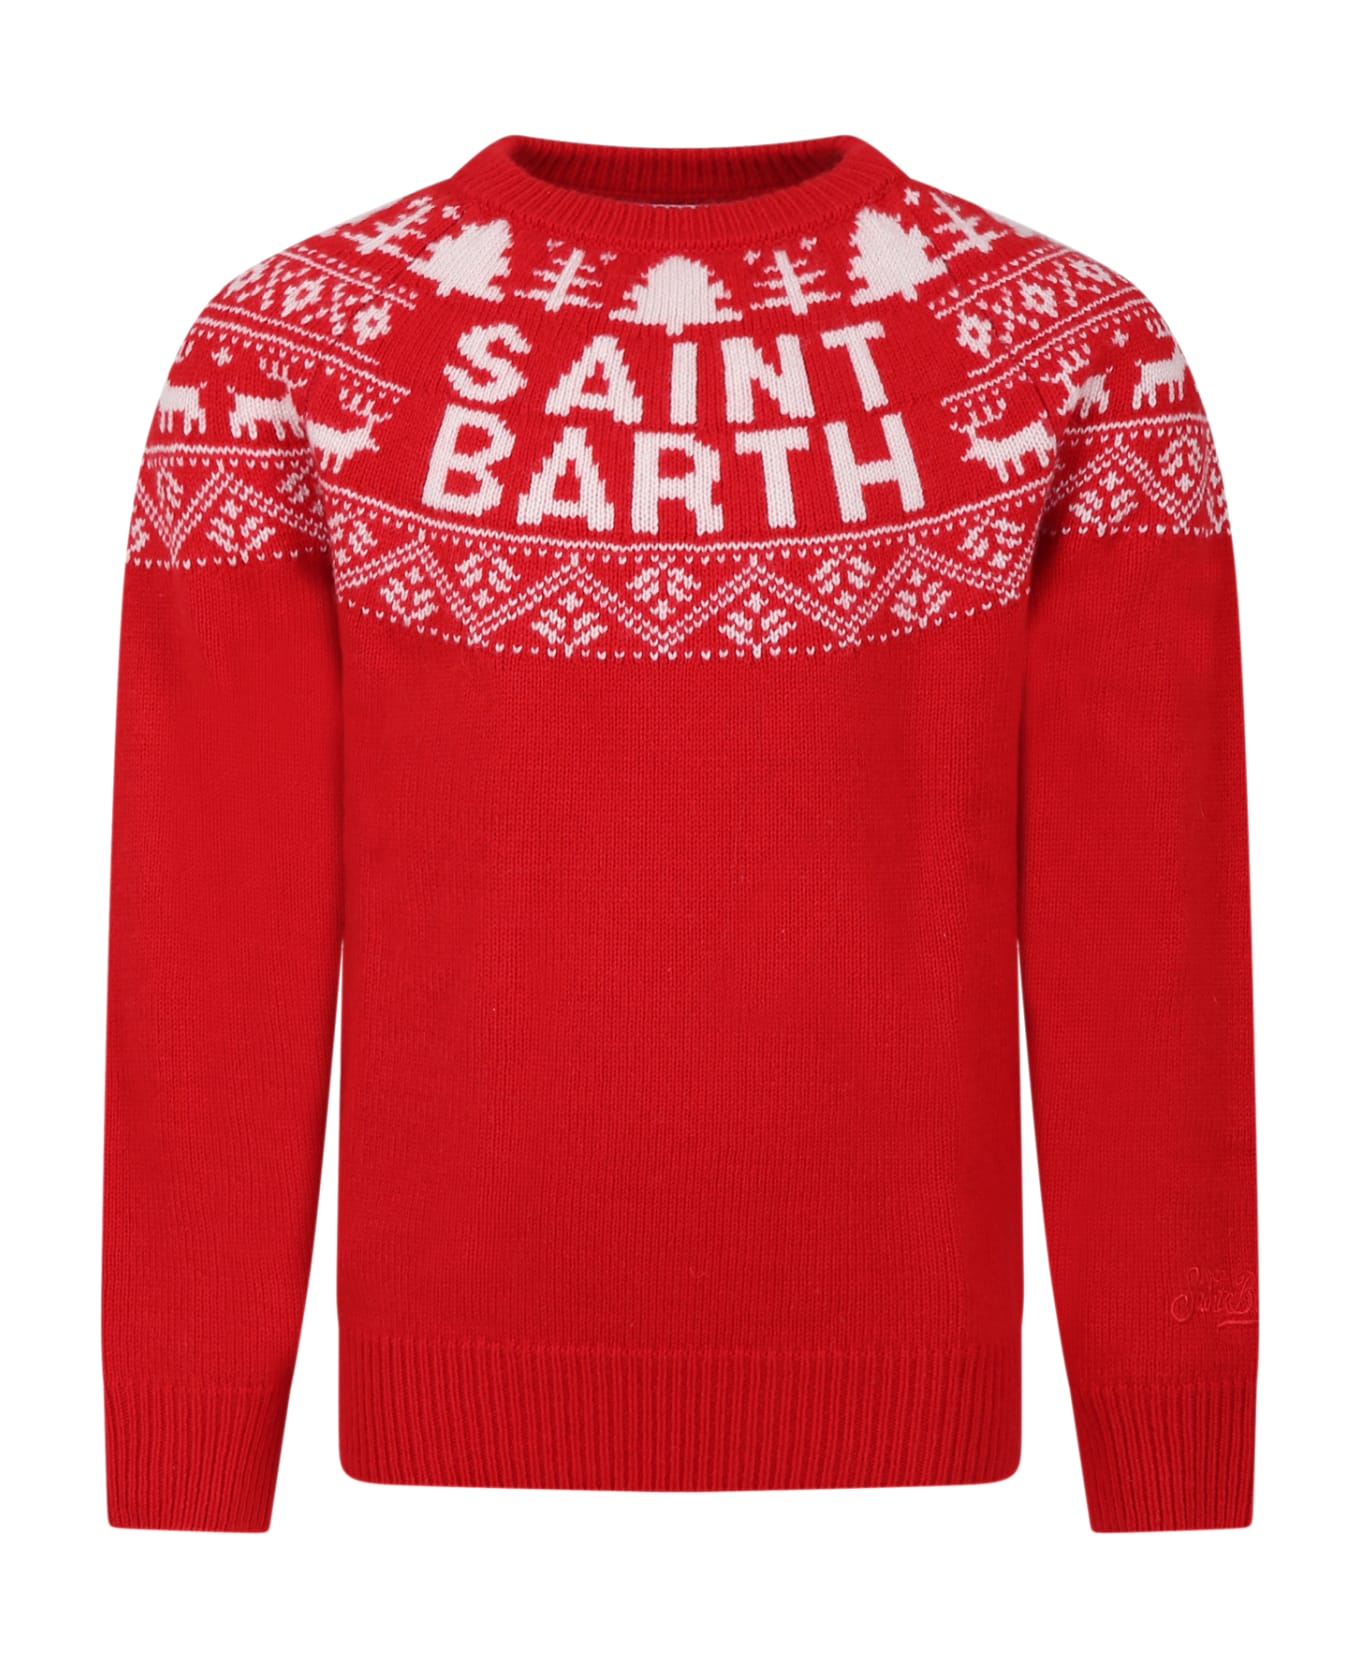 MC2 Saint Barth Red Sweater For Kids With Jacquard Logo Print - Red